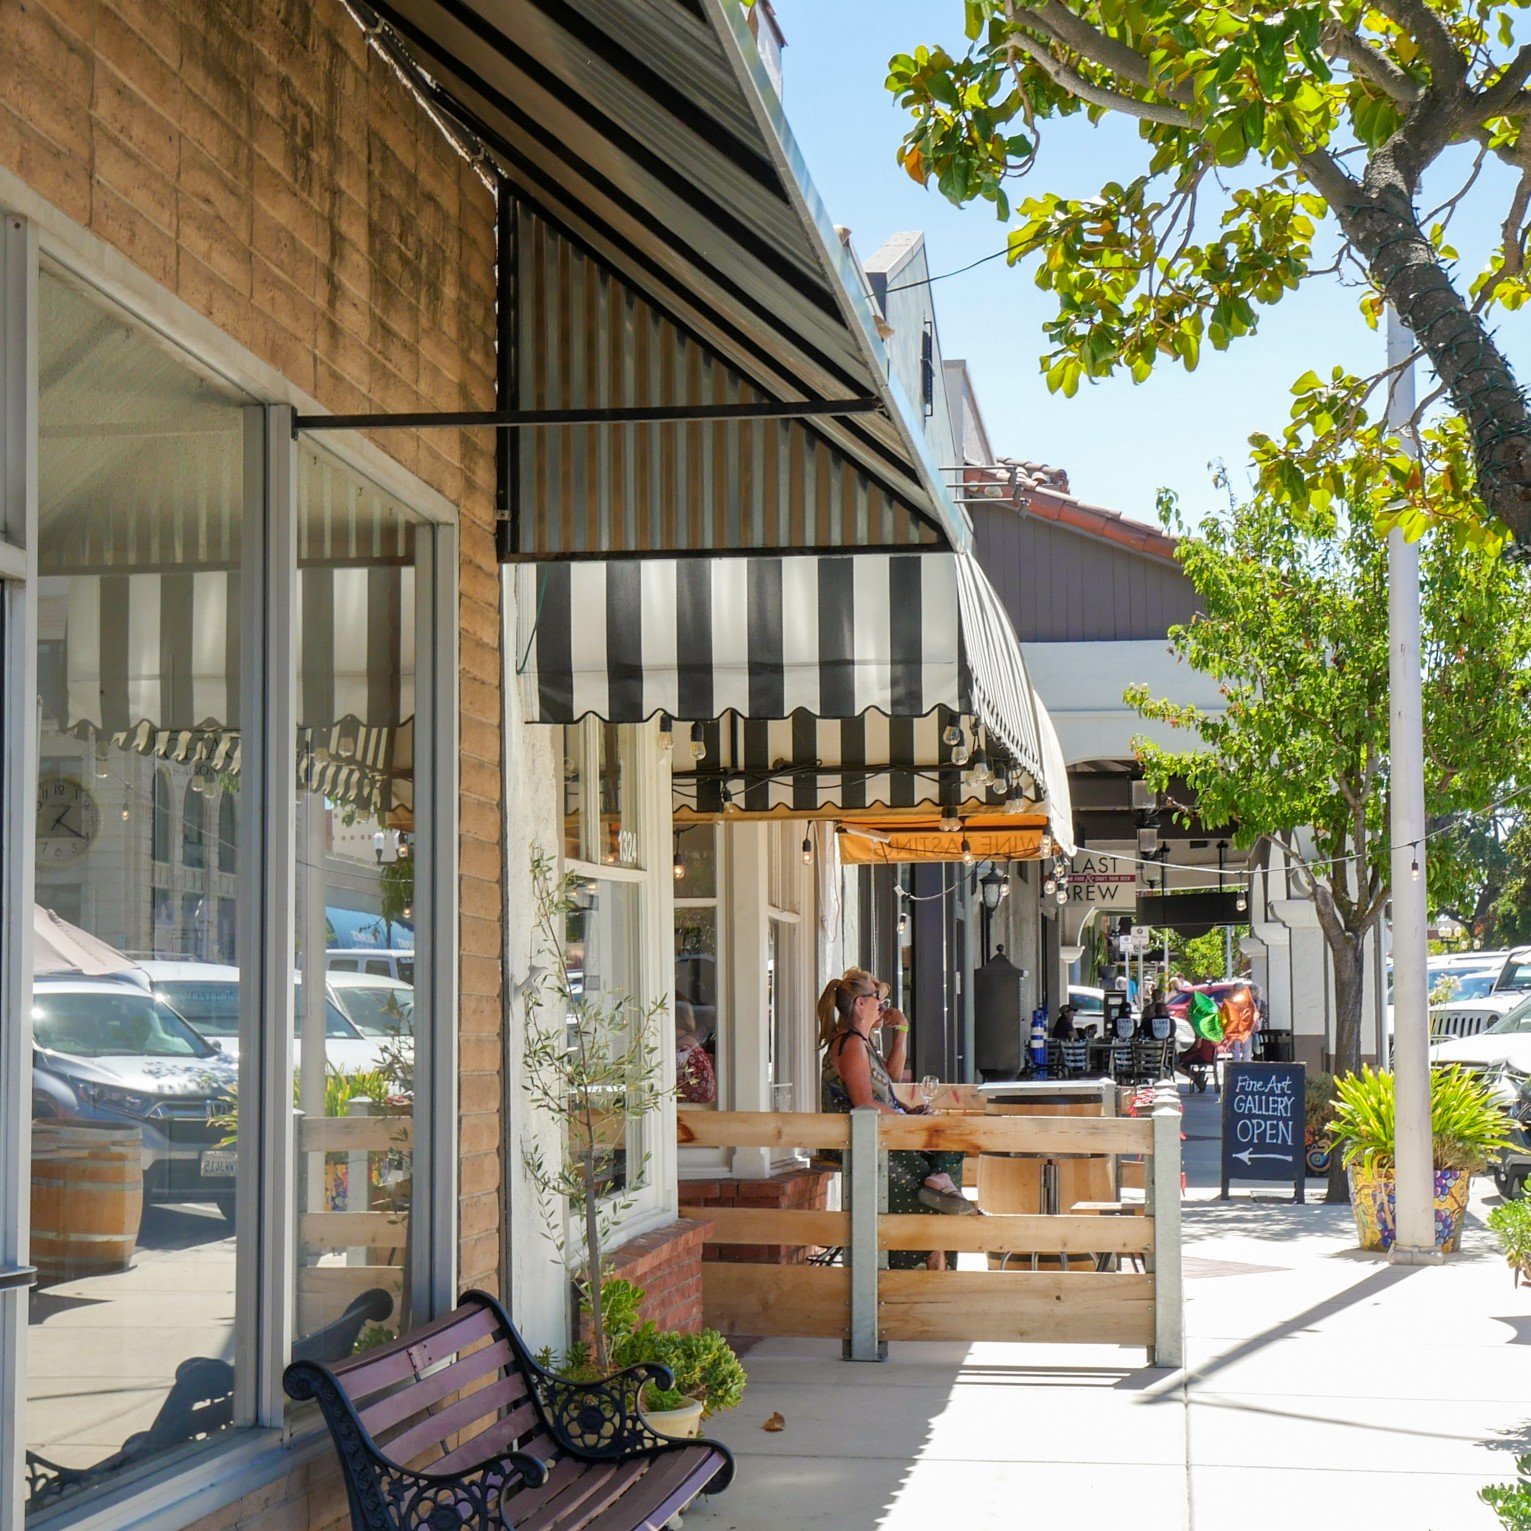 Downtown Paso Robles is the beating heart of California's Central Coast wine country. Wander charming streets, lined with boutique shops and galleries, as the scent of coffee blends with the promise of exquisite wines. Sample bold reds and crisp whit